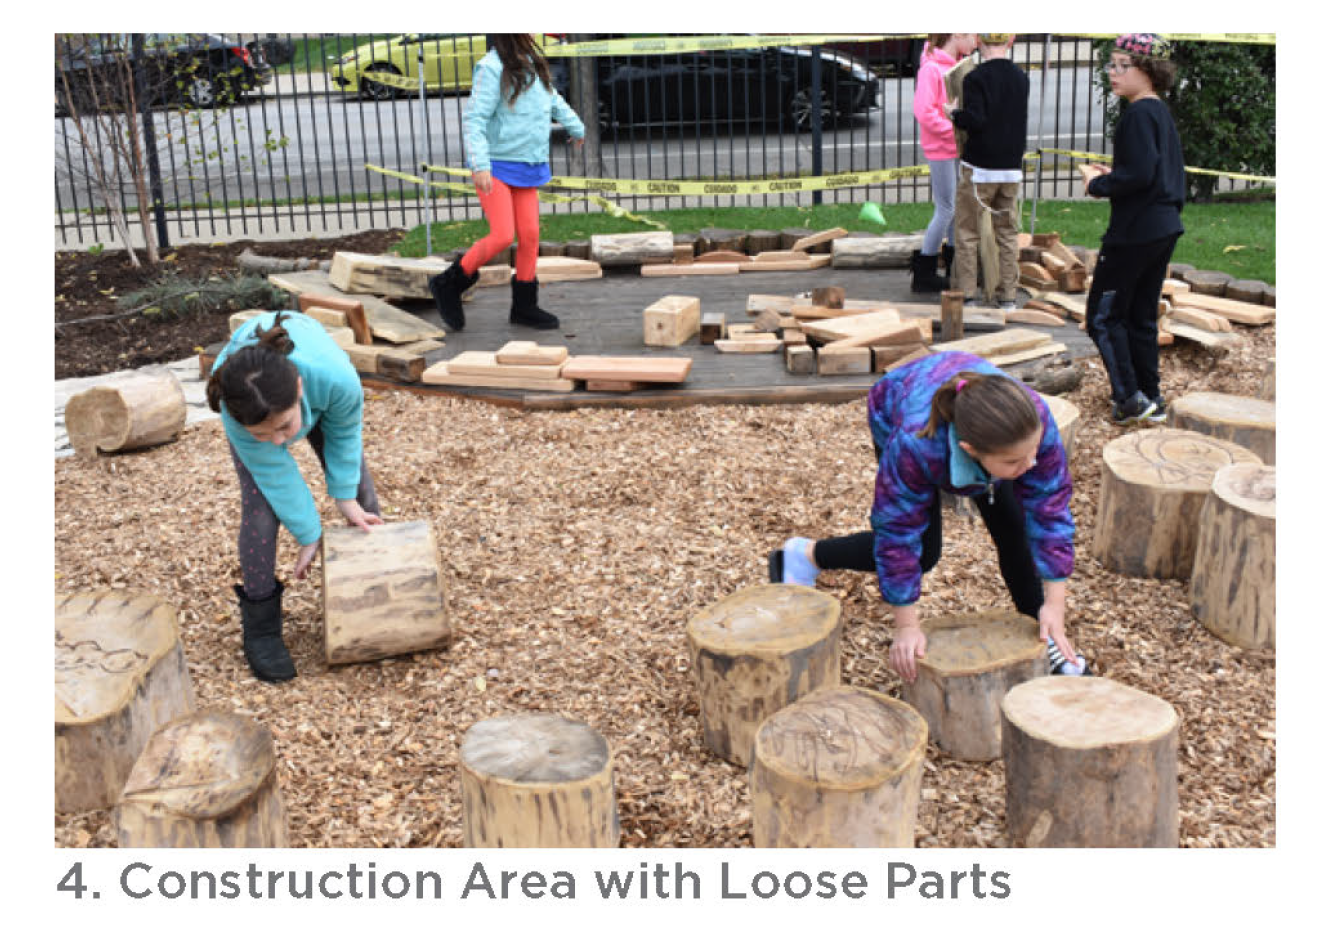 Photo of the construction area with loose parts.